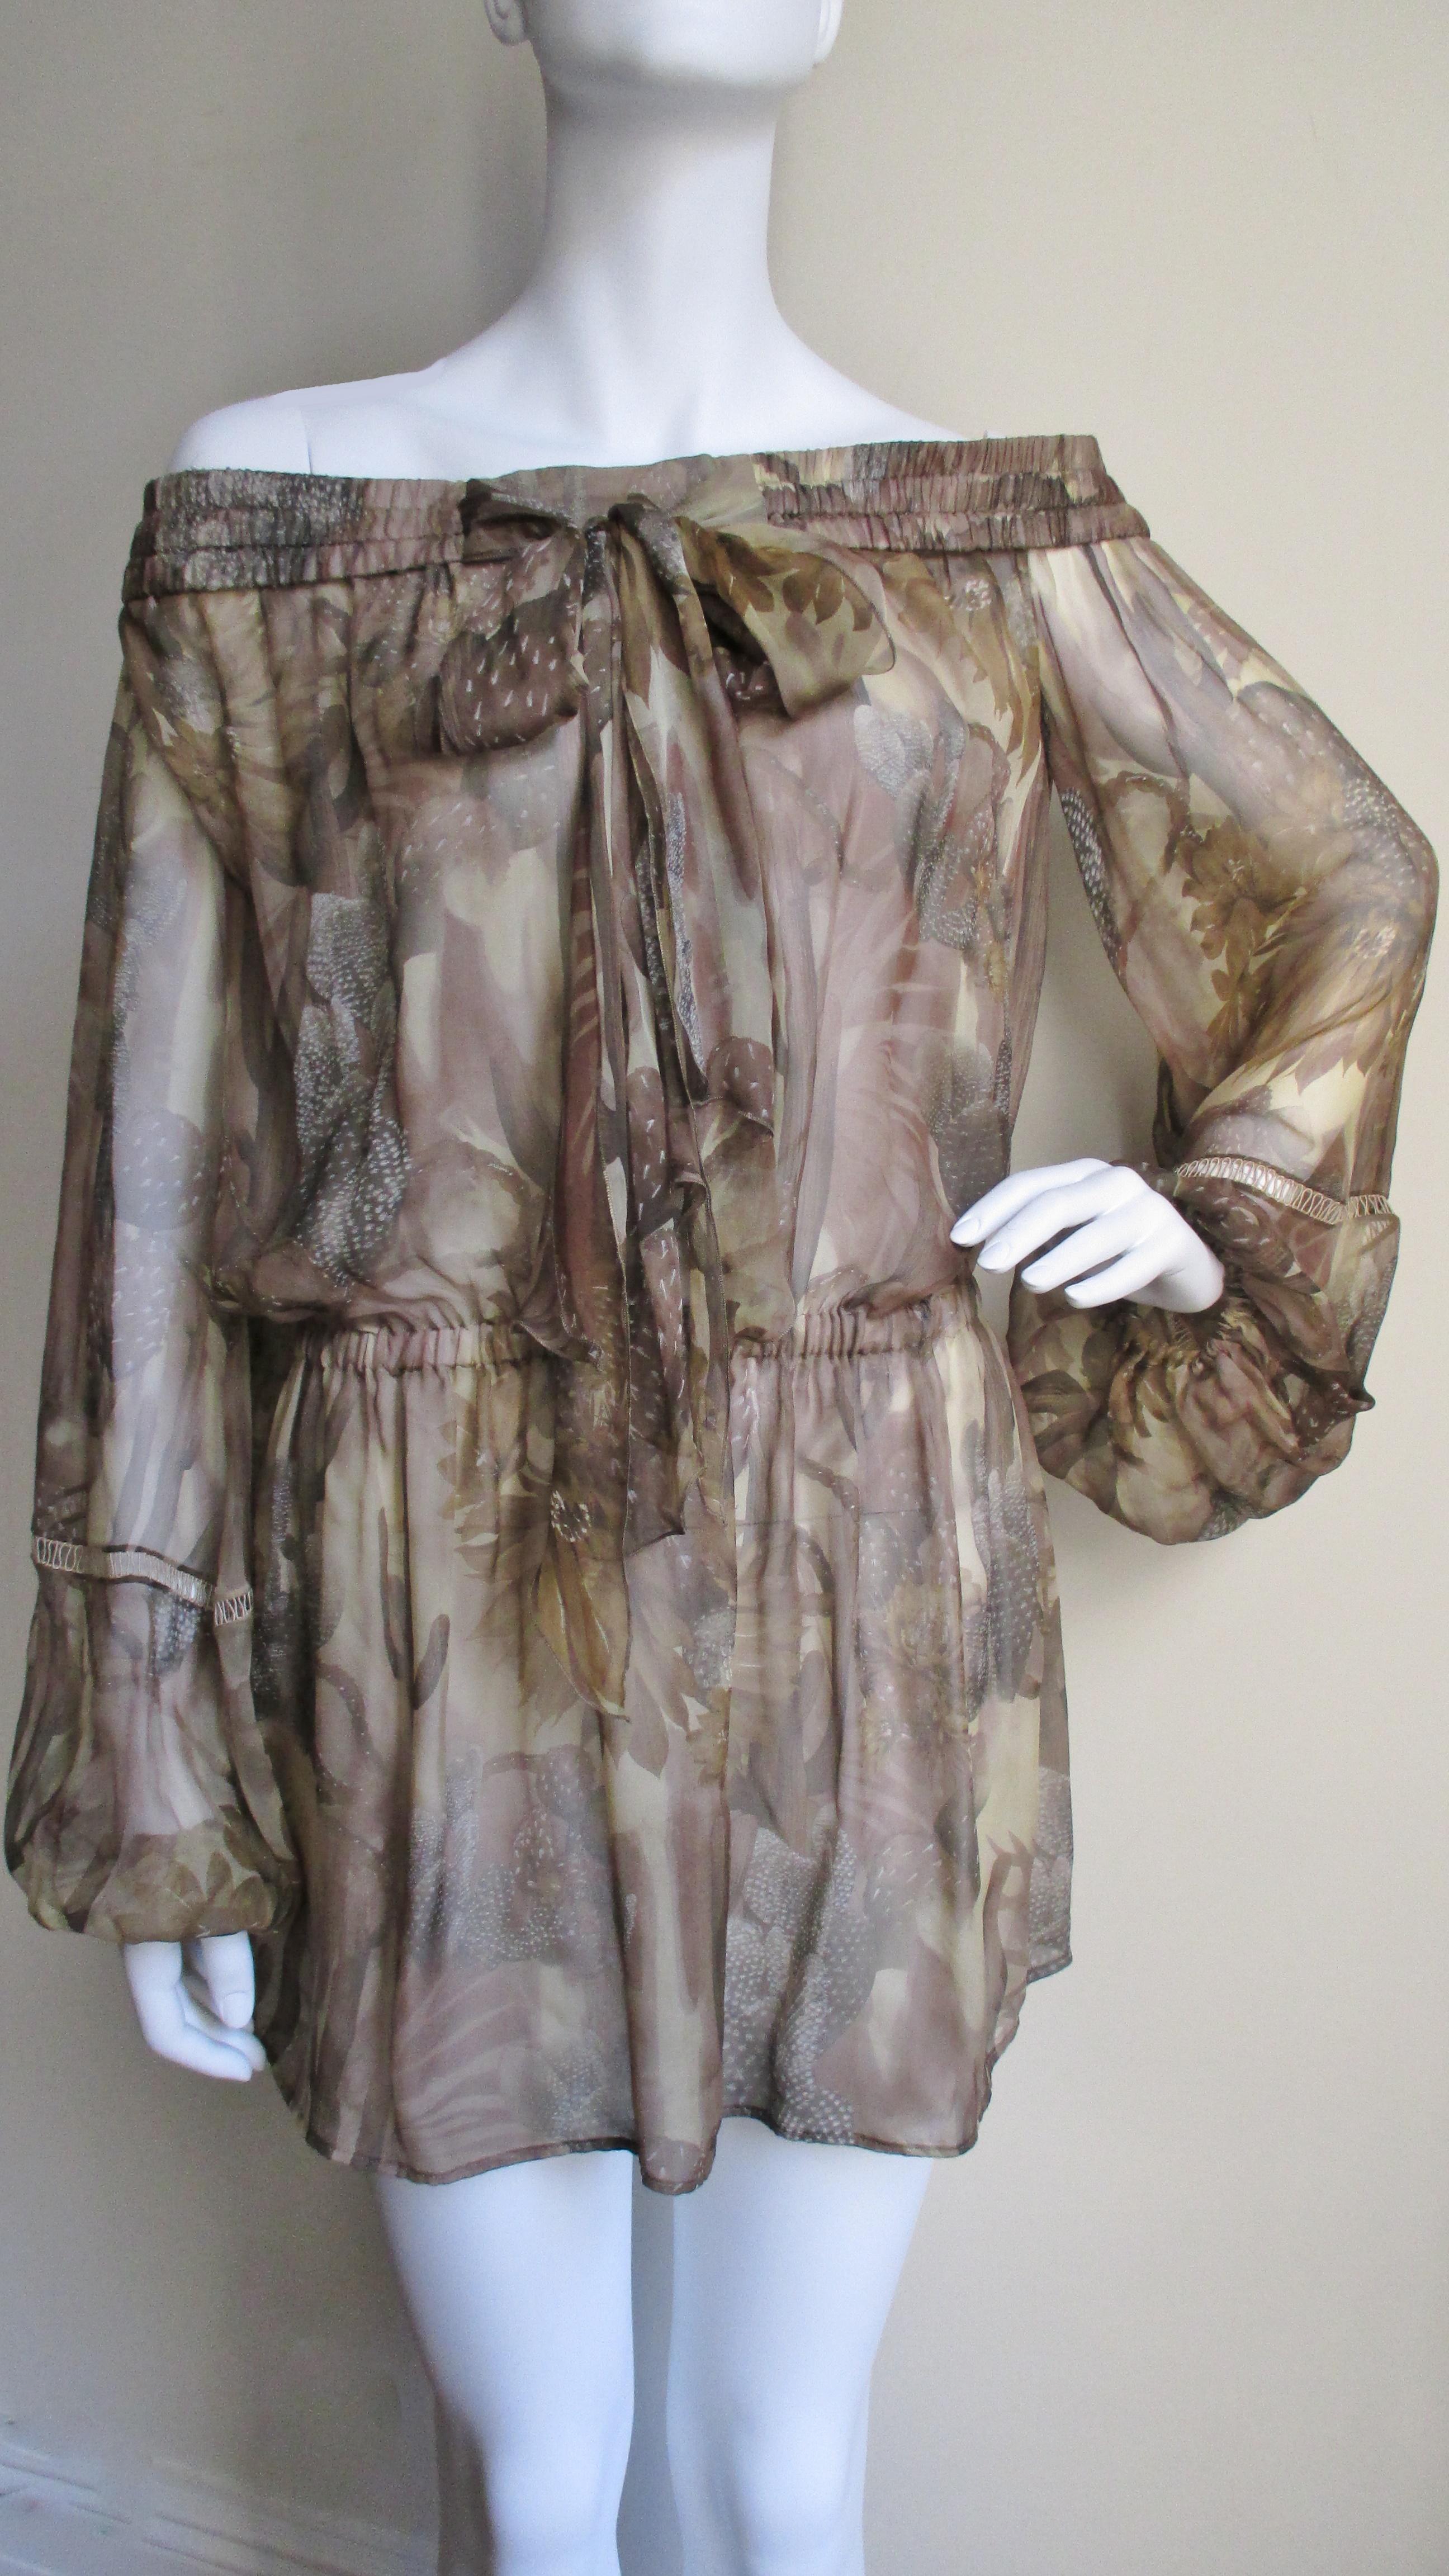 A great silk cactus print dress in beige and browns from Versace. The dress is worn off the shoulders with a flexible band and a center front tie.  It is a blouson style with an adjustable drop waist resting at the upper hips. There is elaborate